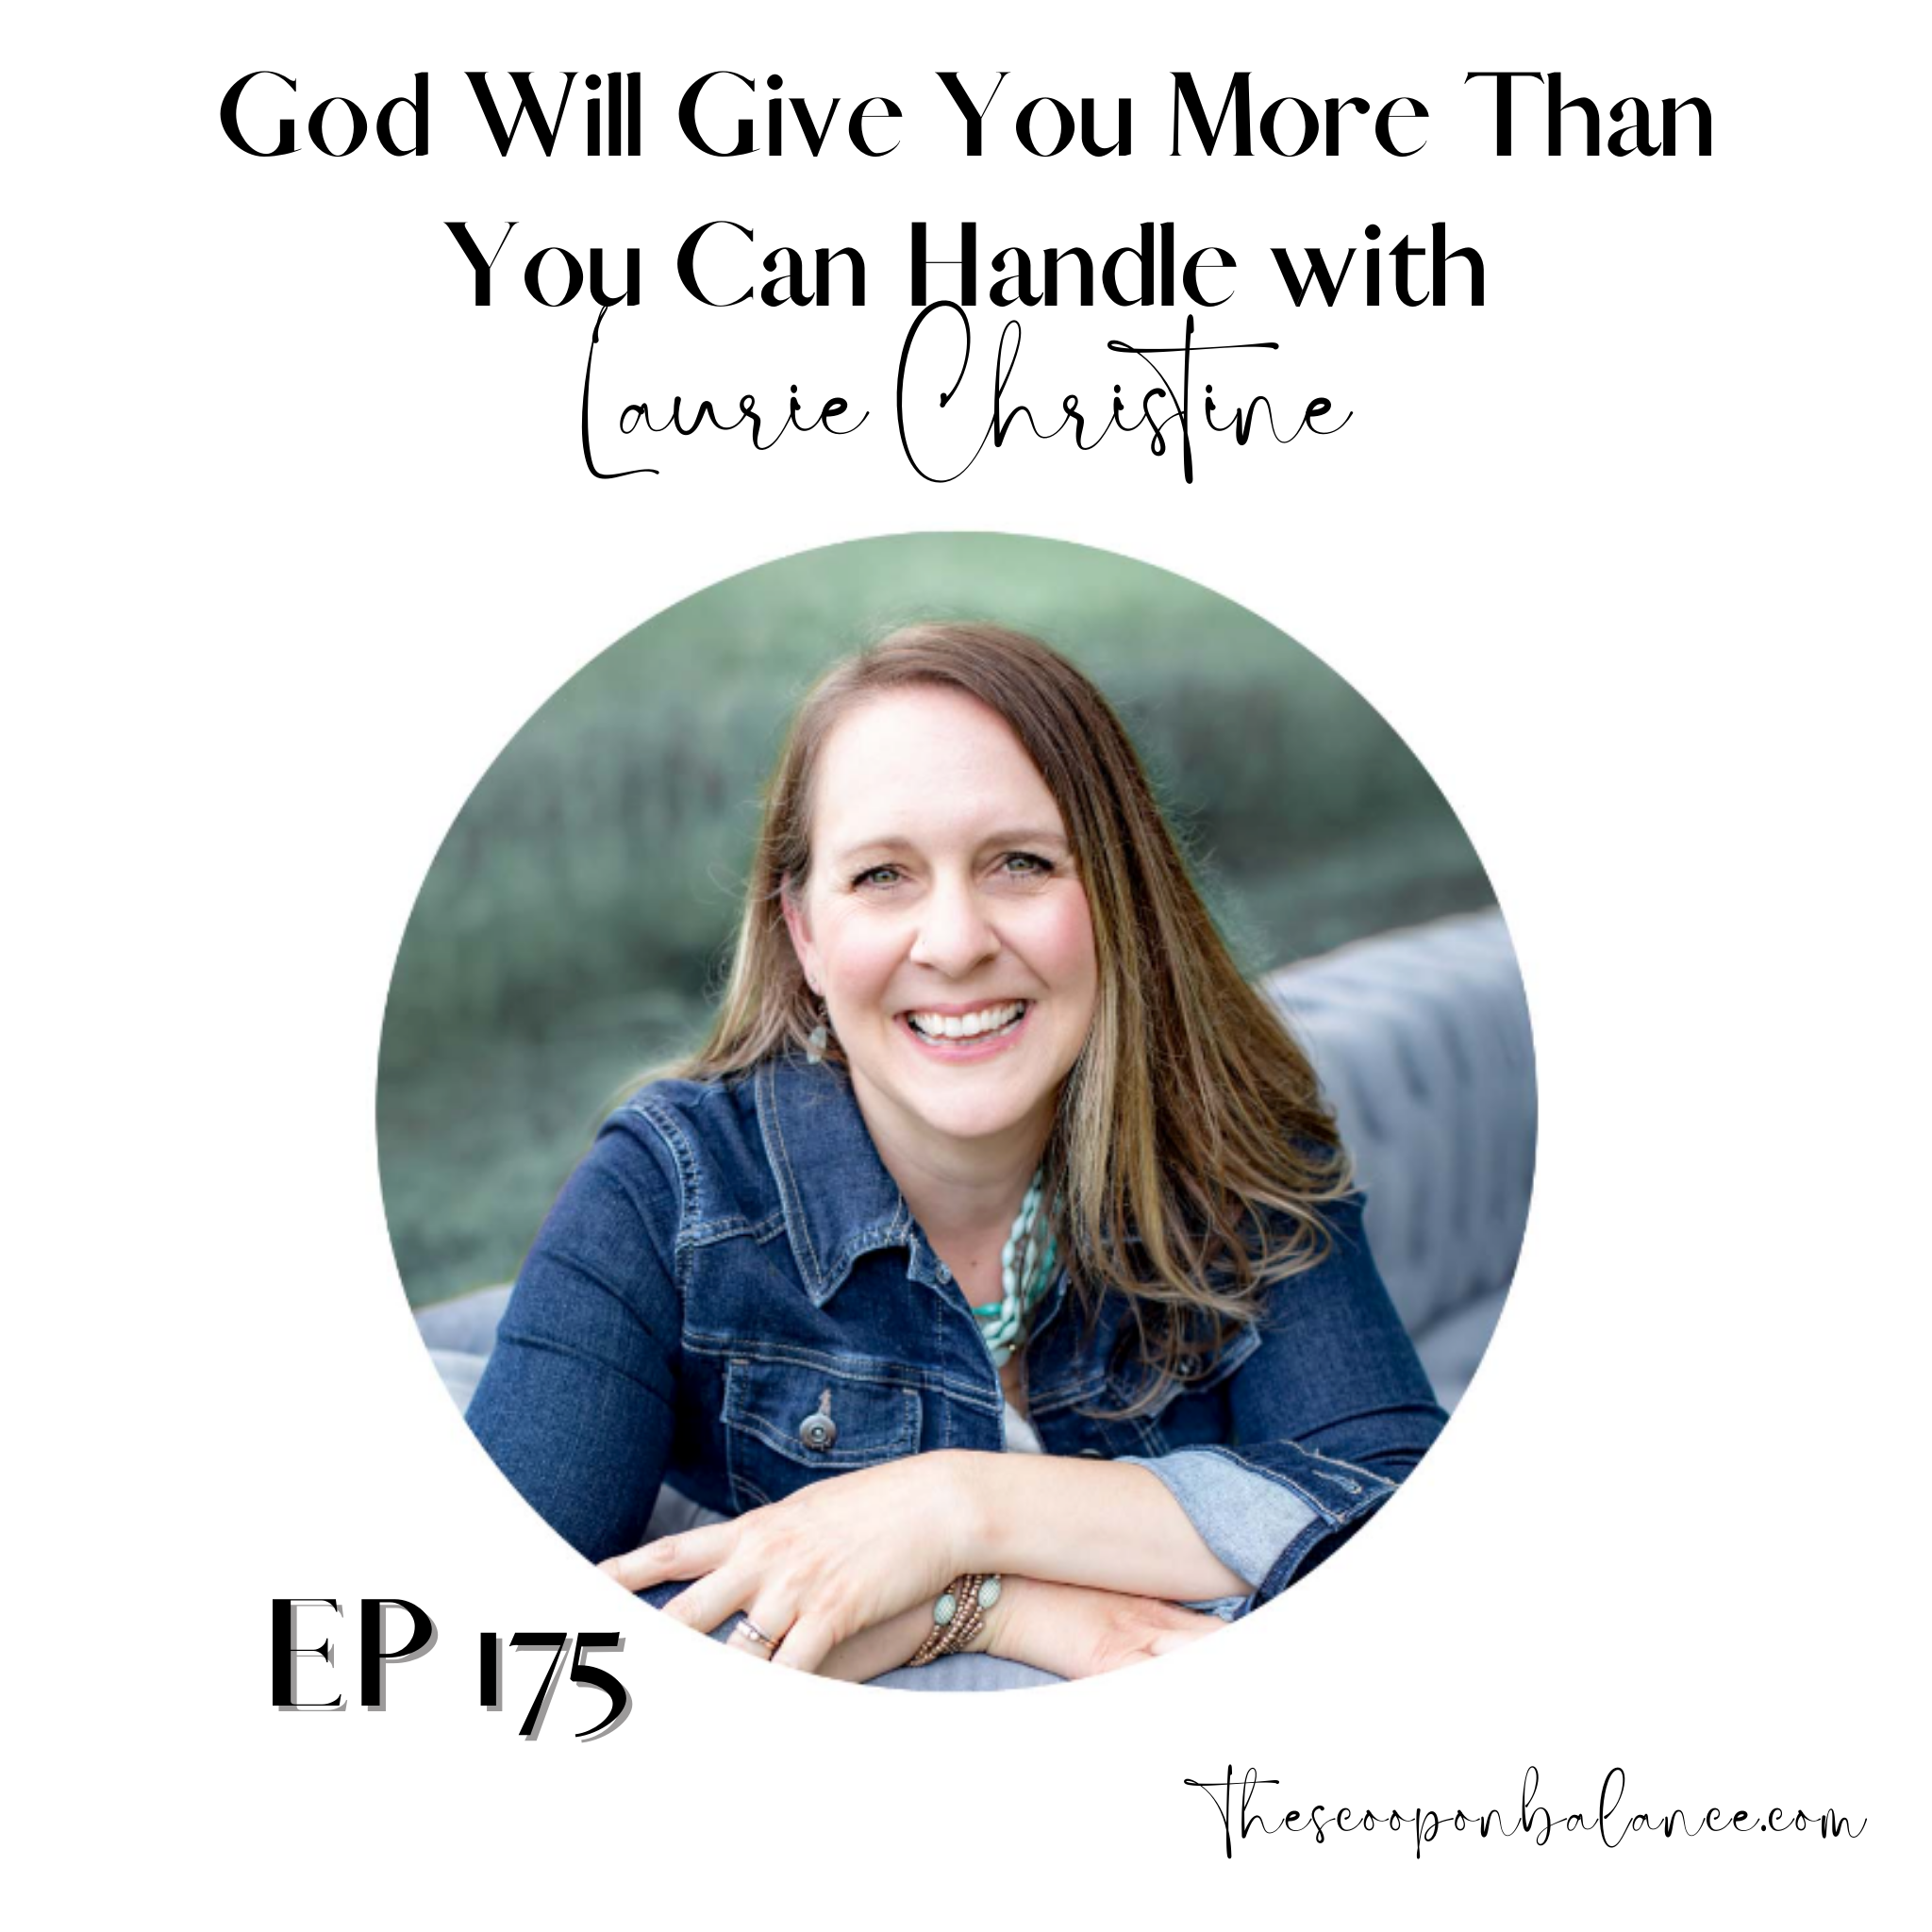 Ep 175: God Will Give You More Than You Can Handle with Laurie Christine